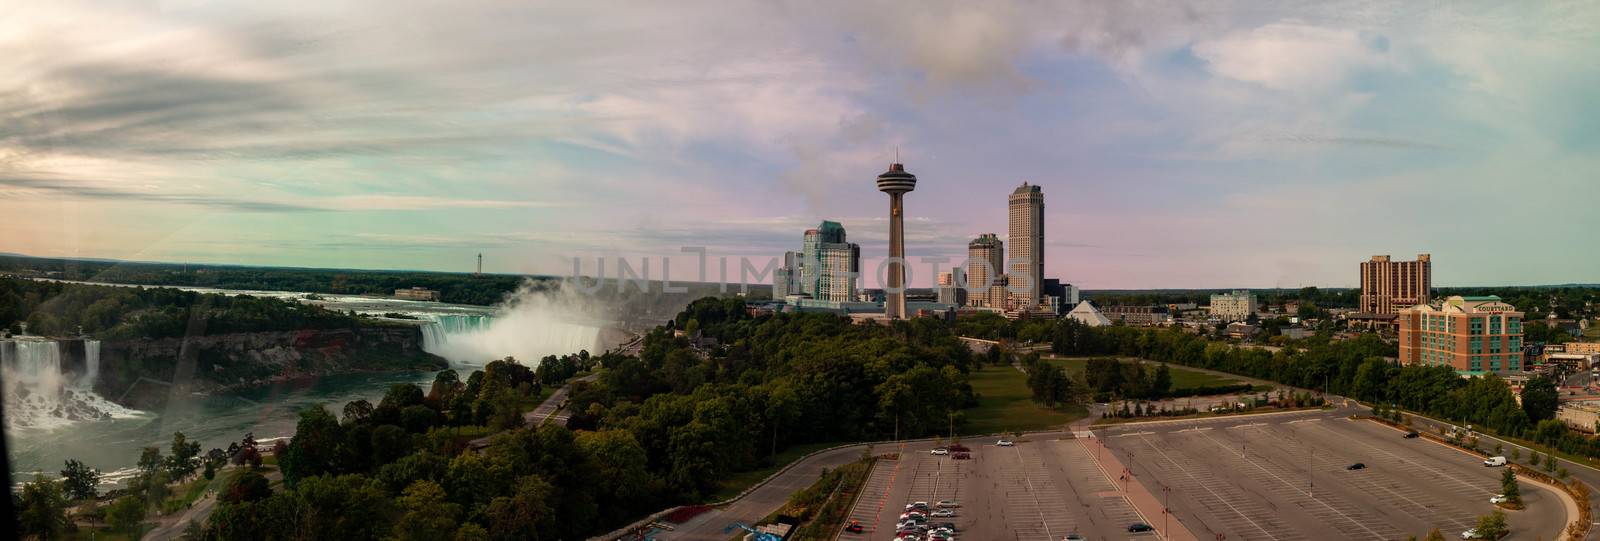 August 26 2020, Niagara falls Canada: Editorial photo of an aerial panormal of the falls and the city of Niagara. Niagara is one of Canadas most popular tourist destinations and has been hit hard by covid. High quality photo